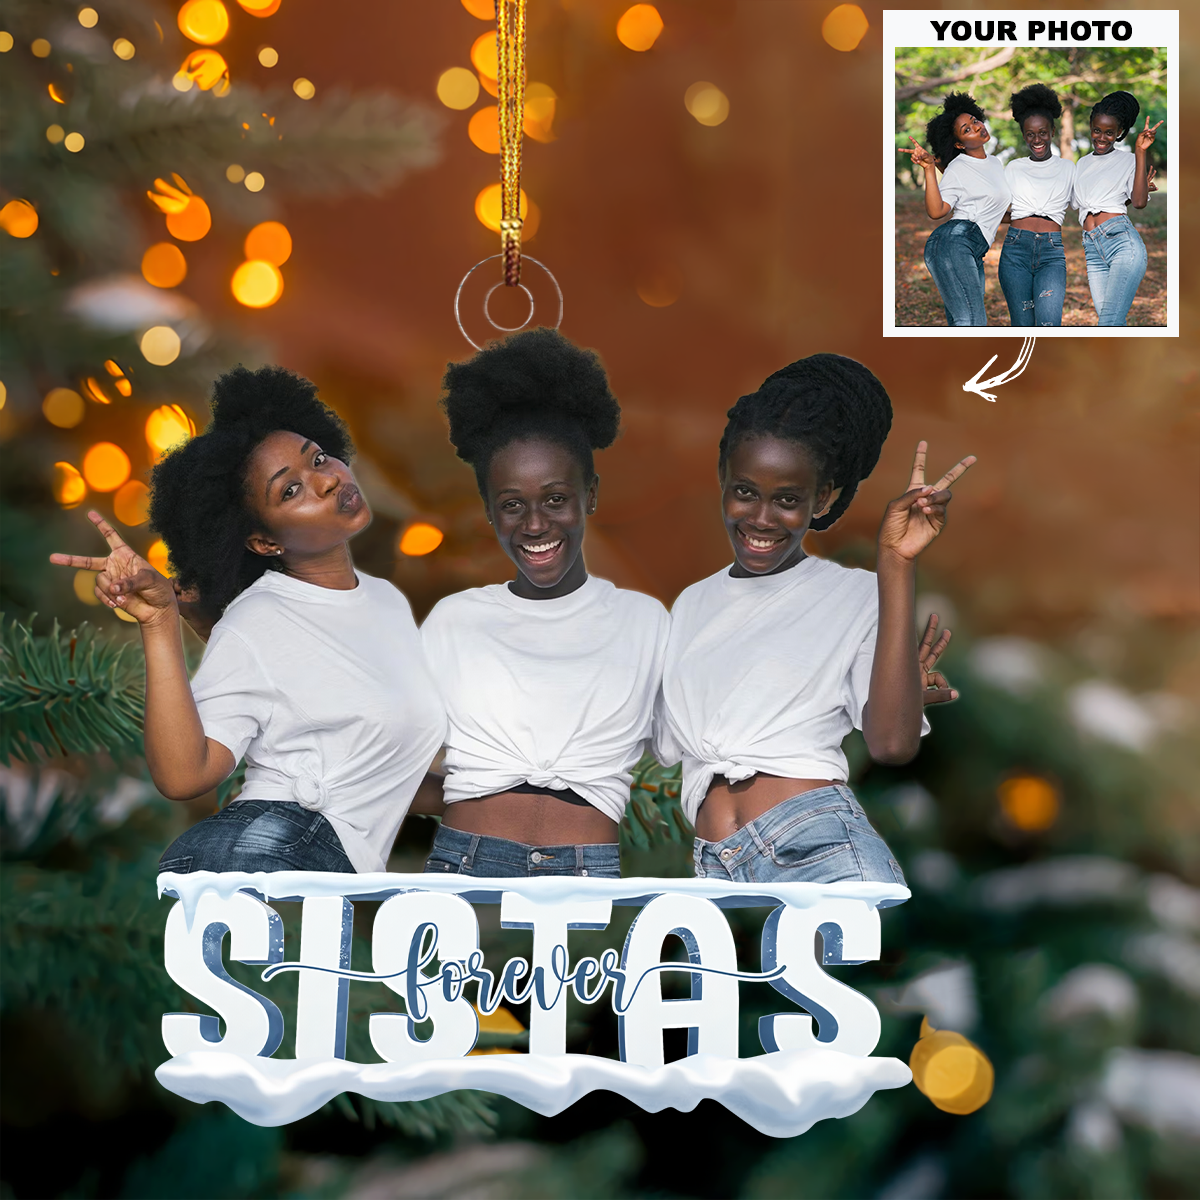 Sistas Forever - Personalized Custom Photo Mica Ornament - Christmas Gift For Friends, Besties UPL0DM006